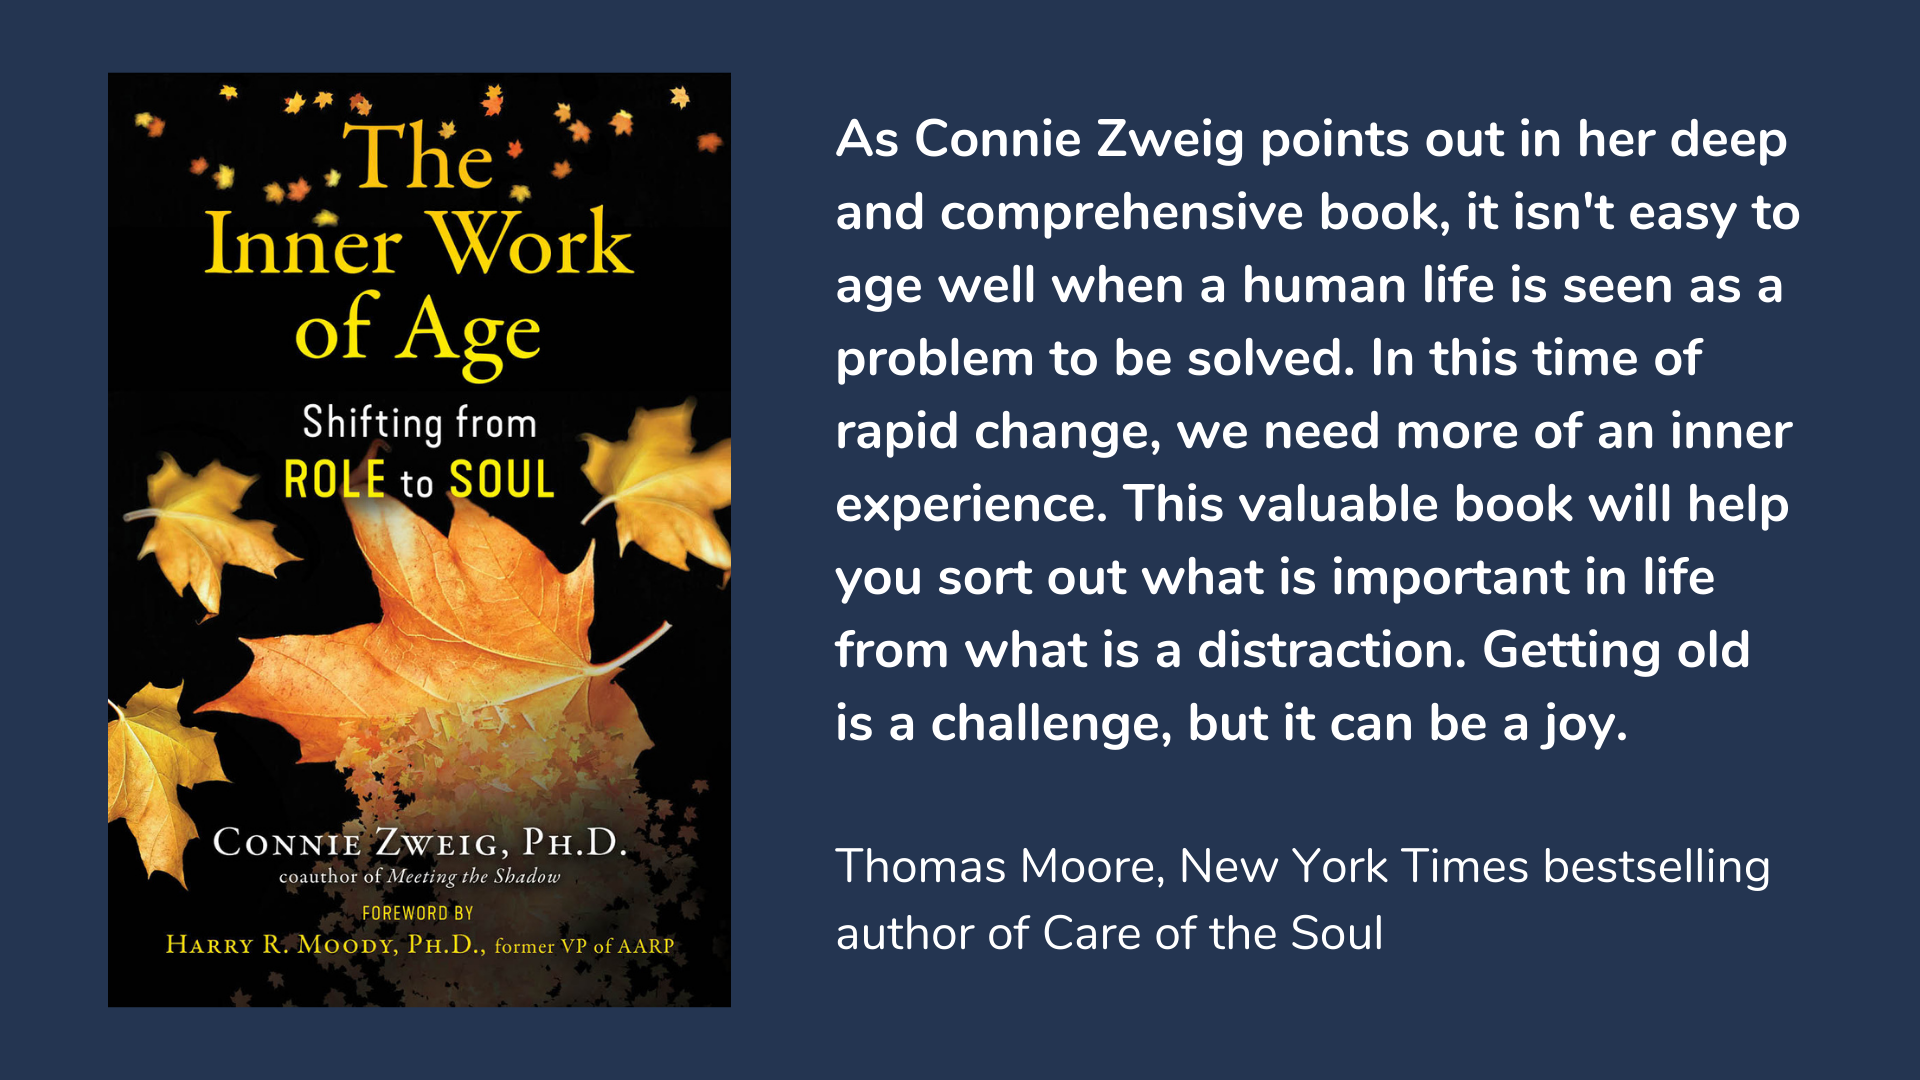 The Inner Work of Age, book cover and description.